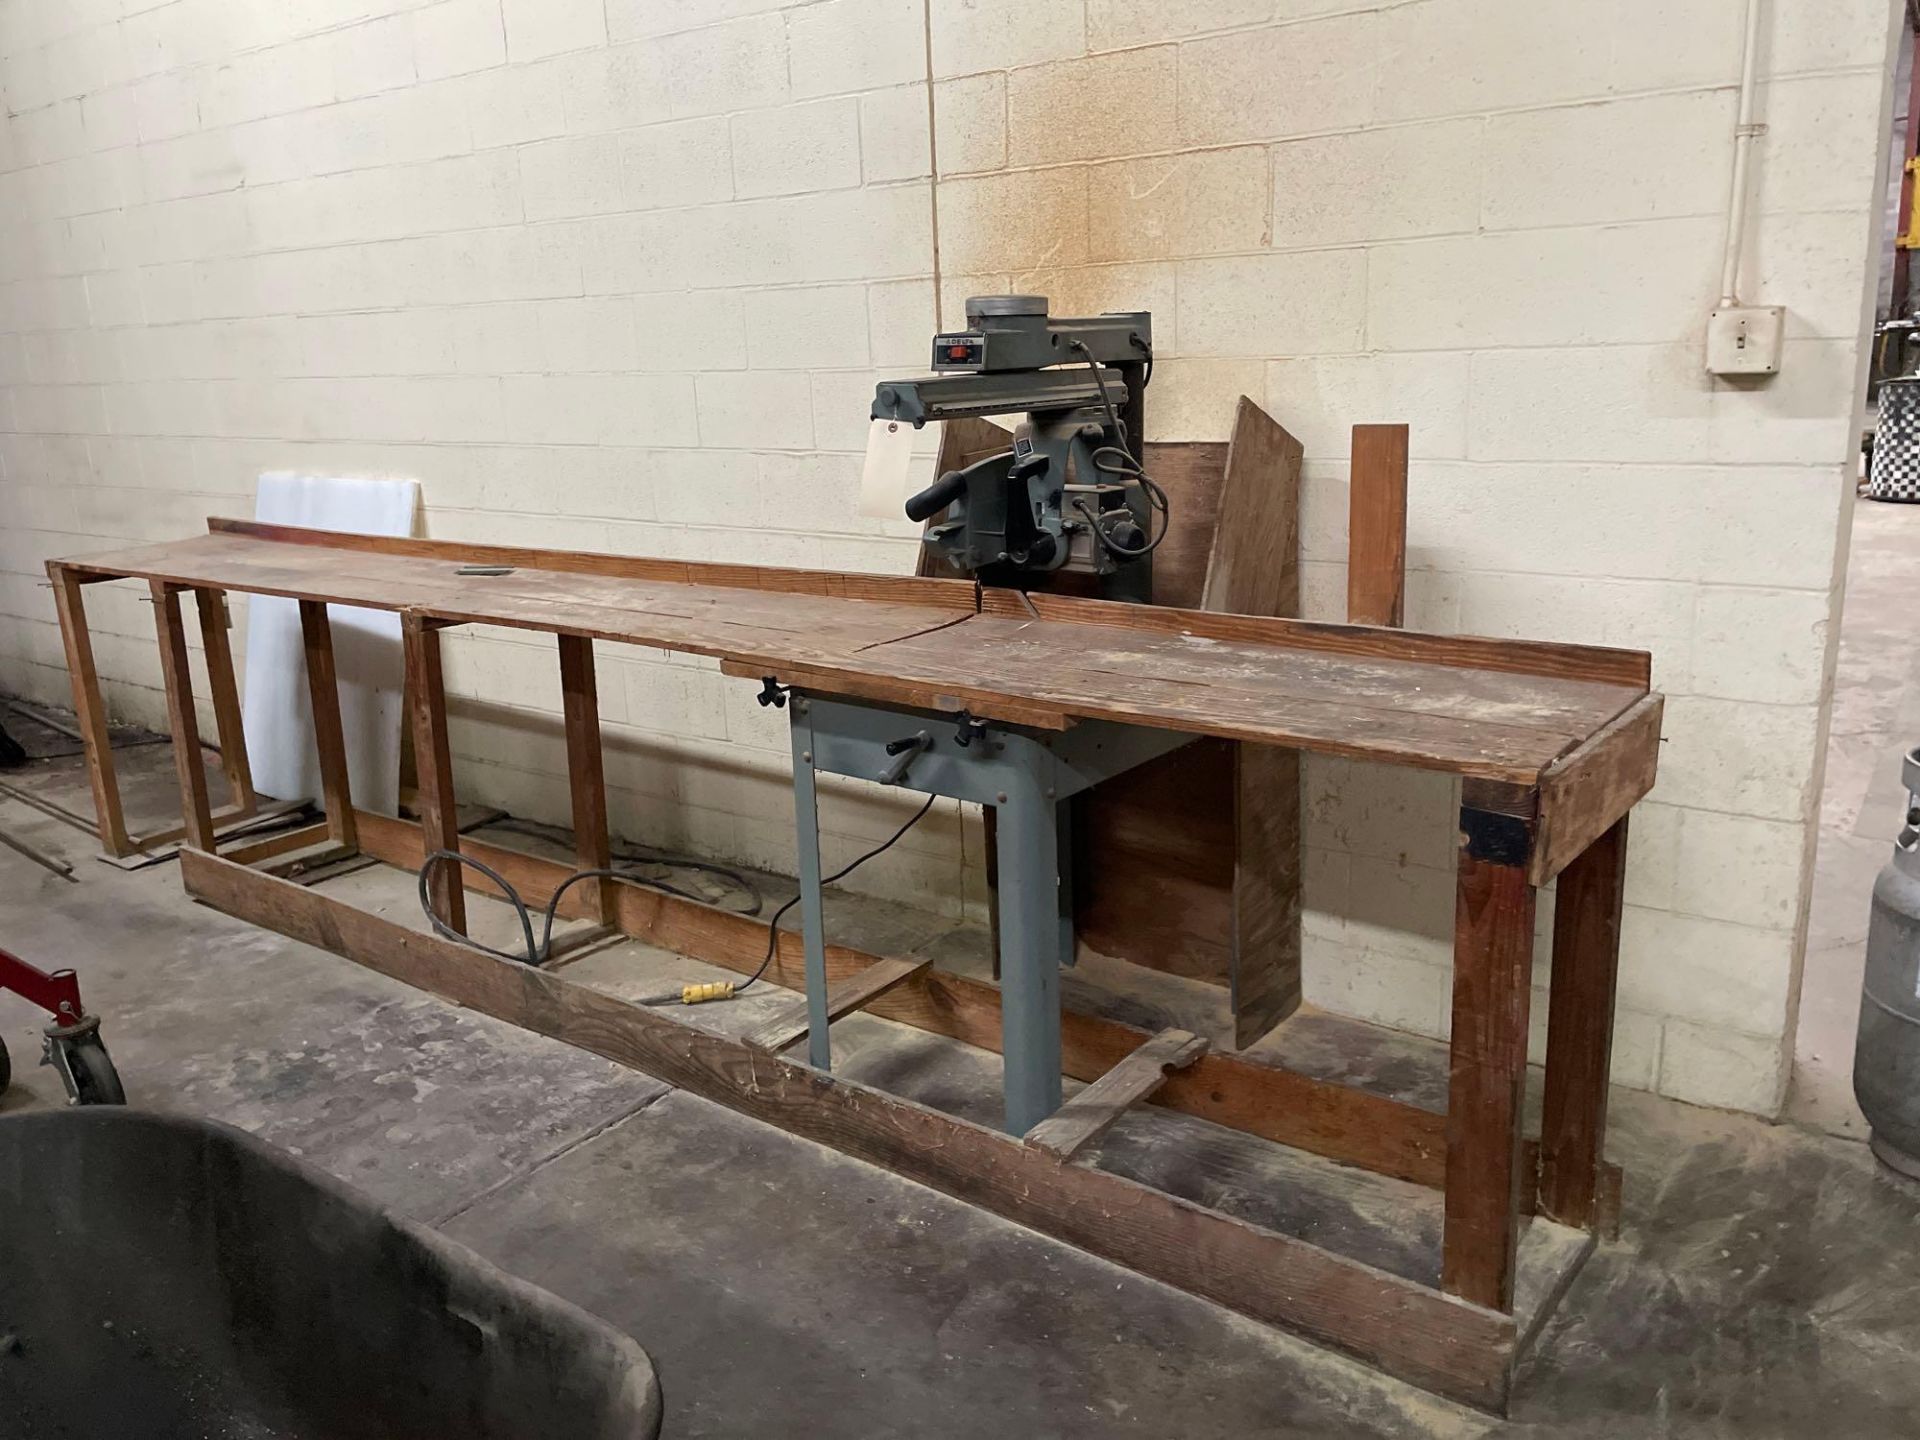 Delta 11” Table Saw with Custom Built Guiding Table 171” X 19” - Image 2 of 6